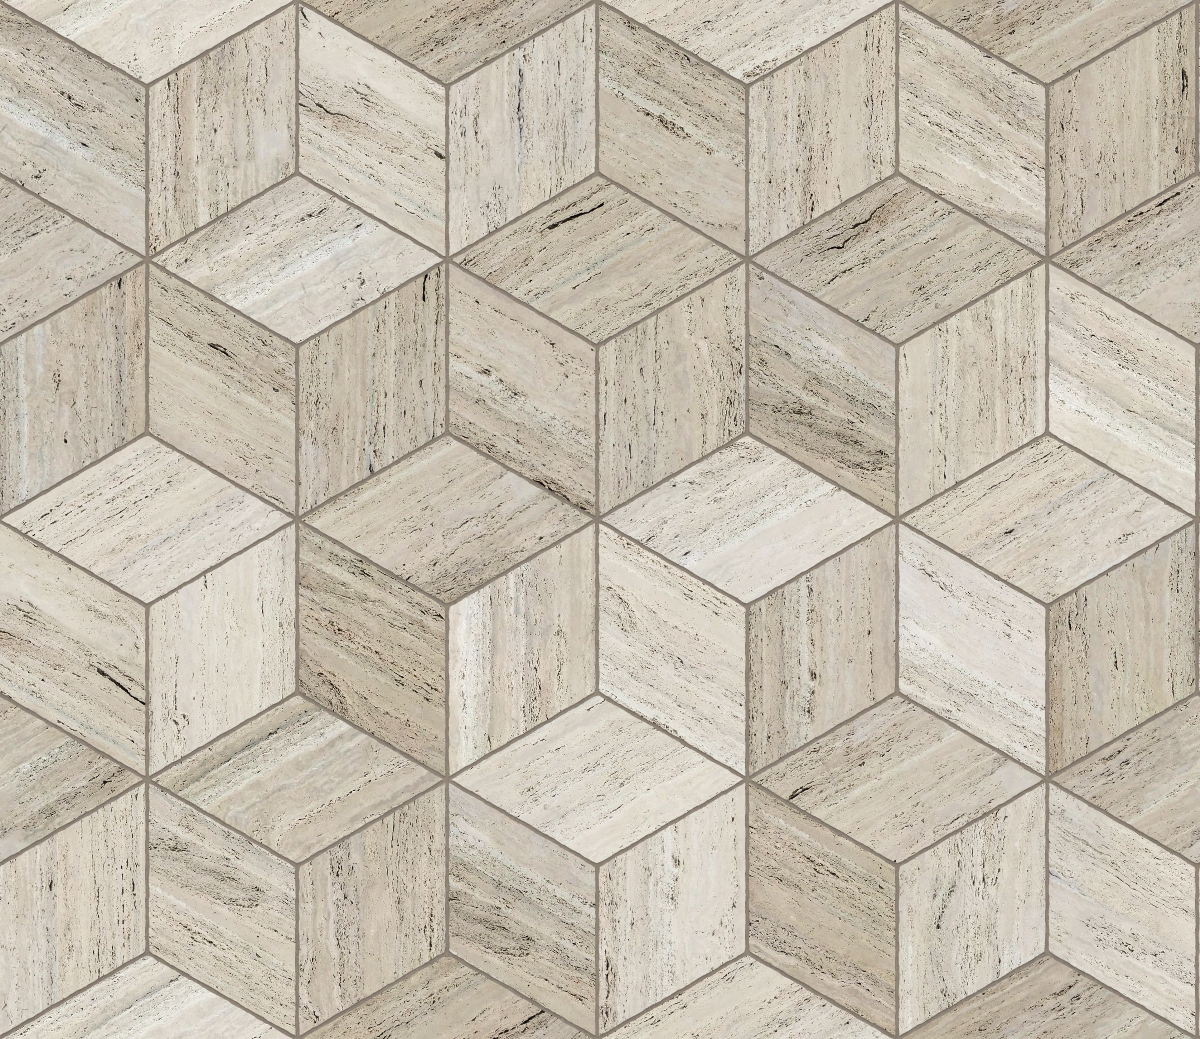 A seamless stone texture with travertine blocks arranged in a Cubic pattern